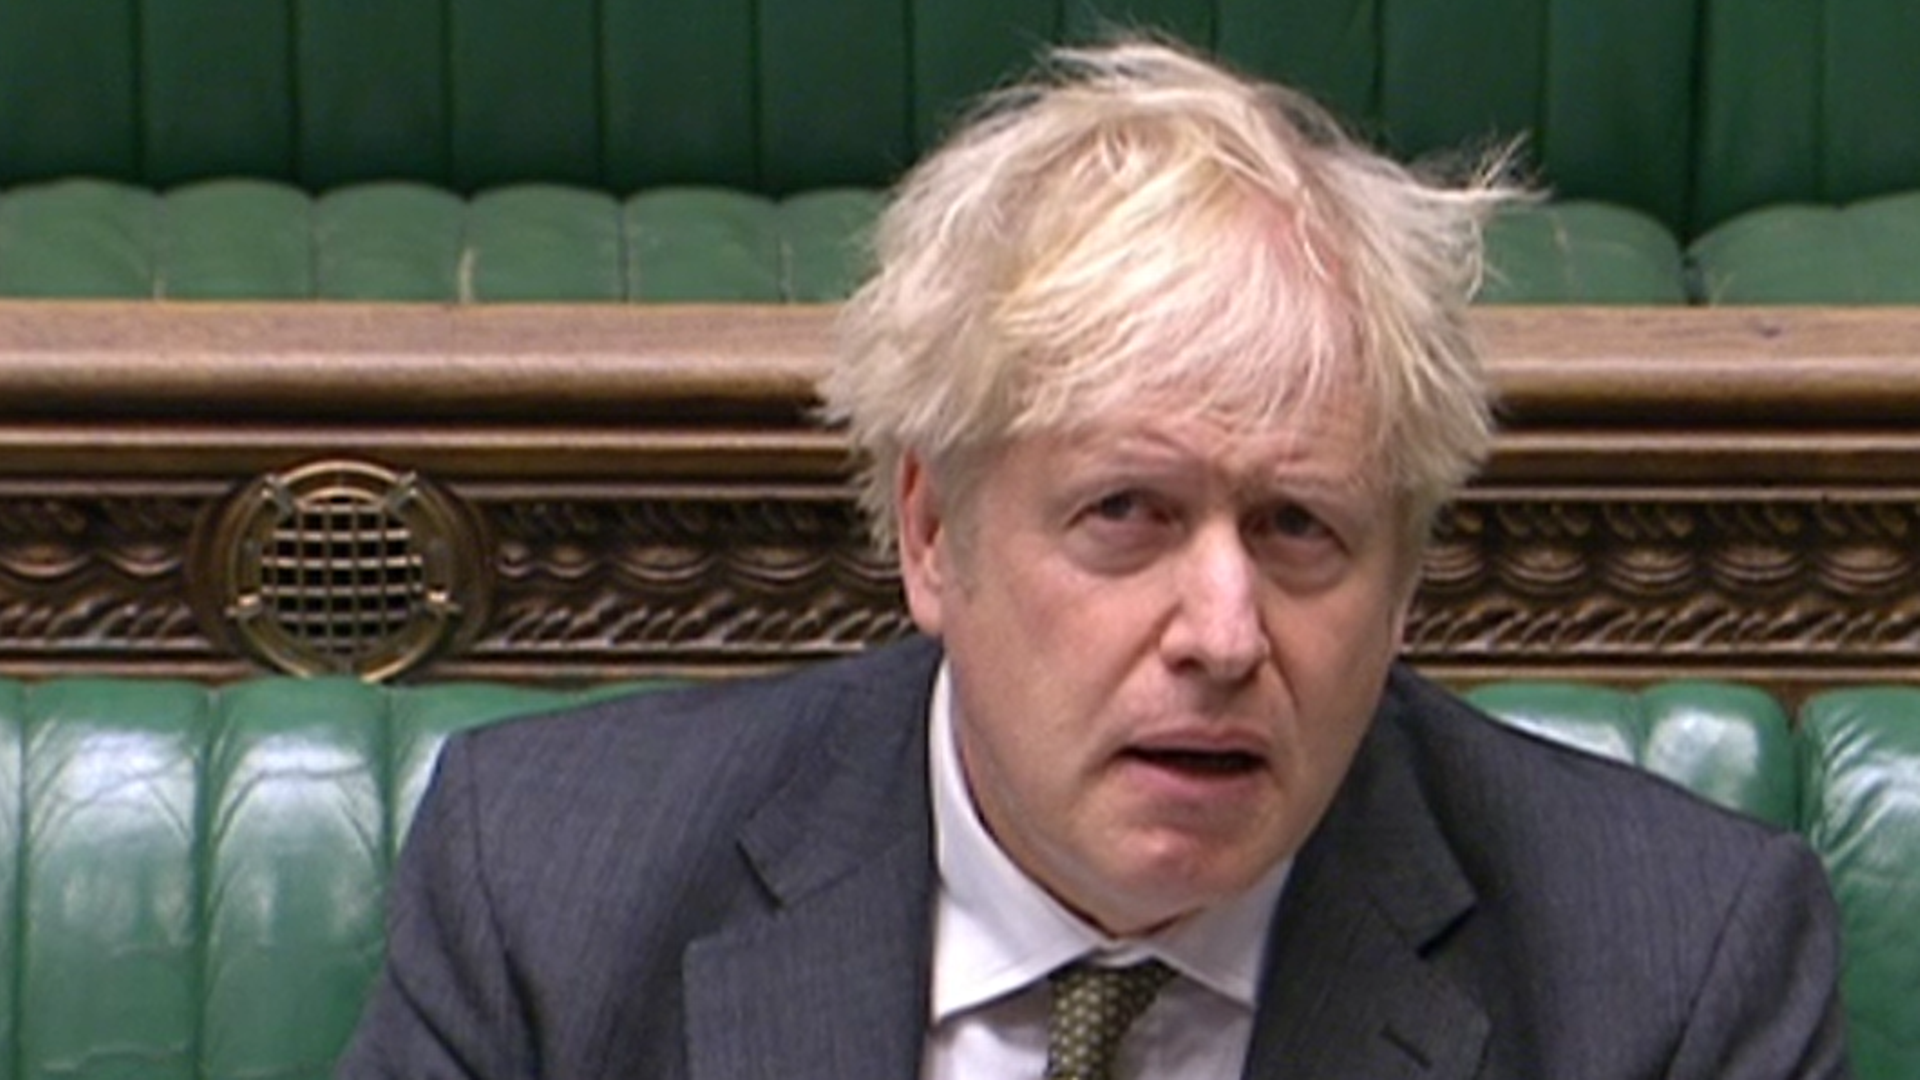 Boris Johnson appearing before prime minister's questions in the House of Commons - Credit: Parliament